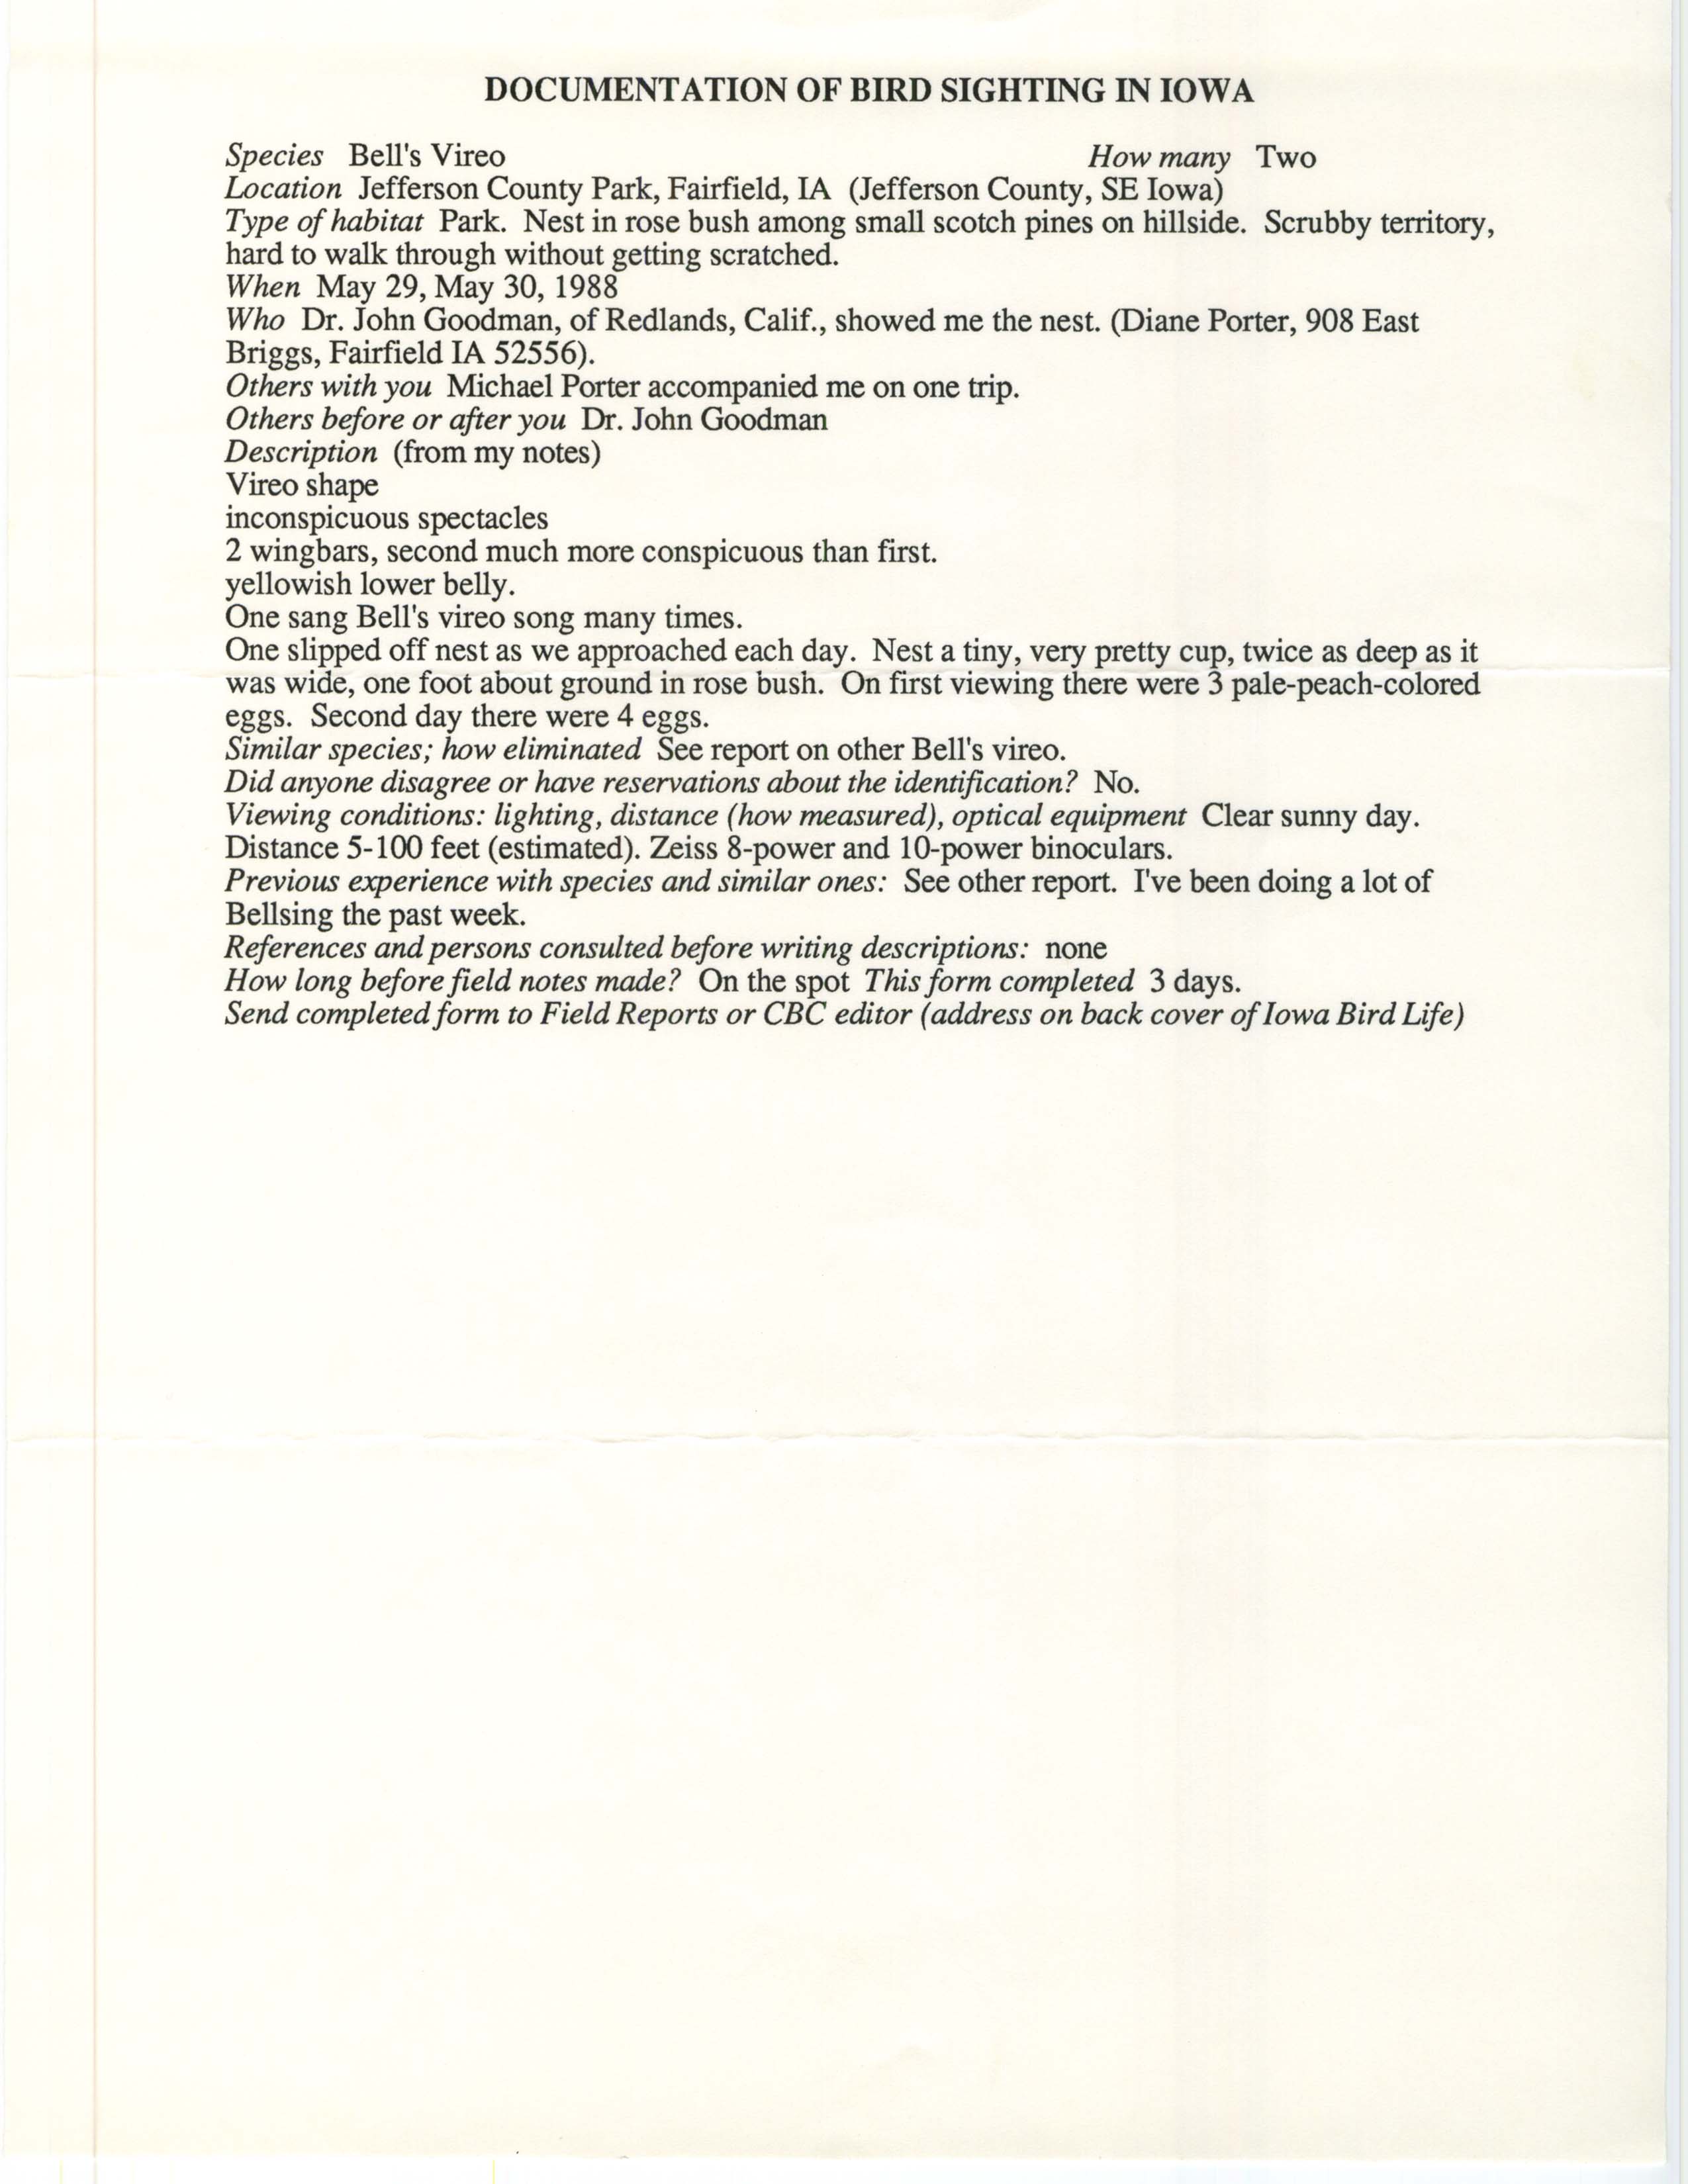 Rare bird documentation form for Bell's Vireo at Jefferson County Park in 1988